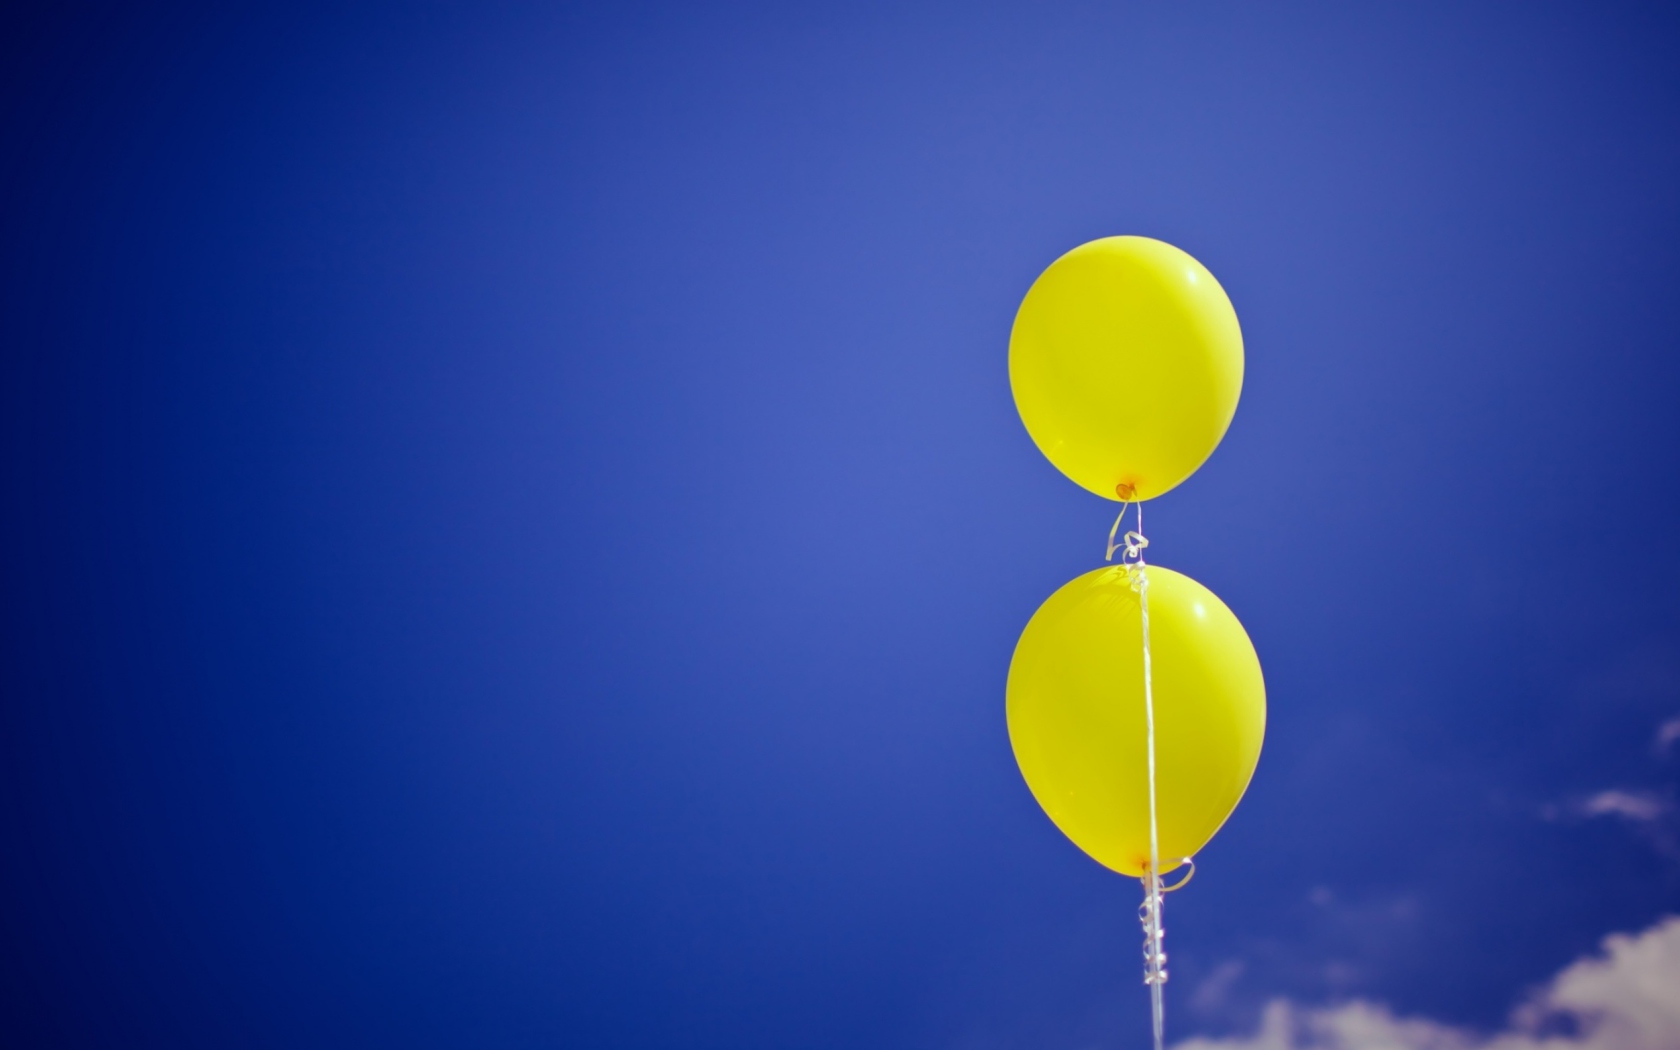 Yellow Balloons In The Blue Sky wallpaper 1680x1050